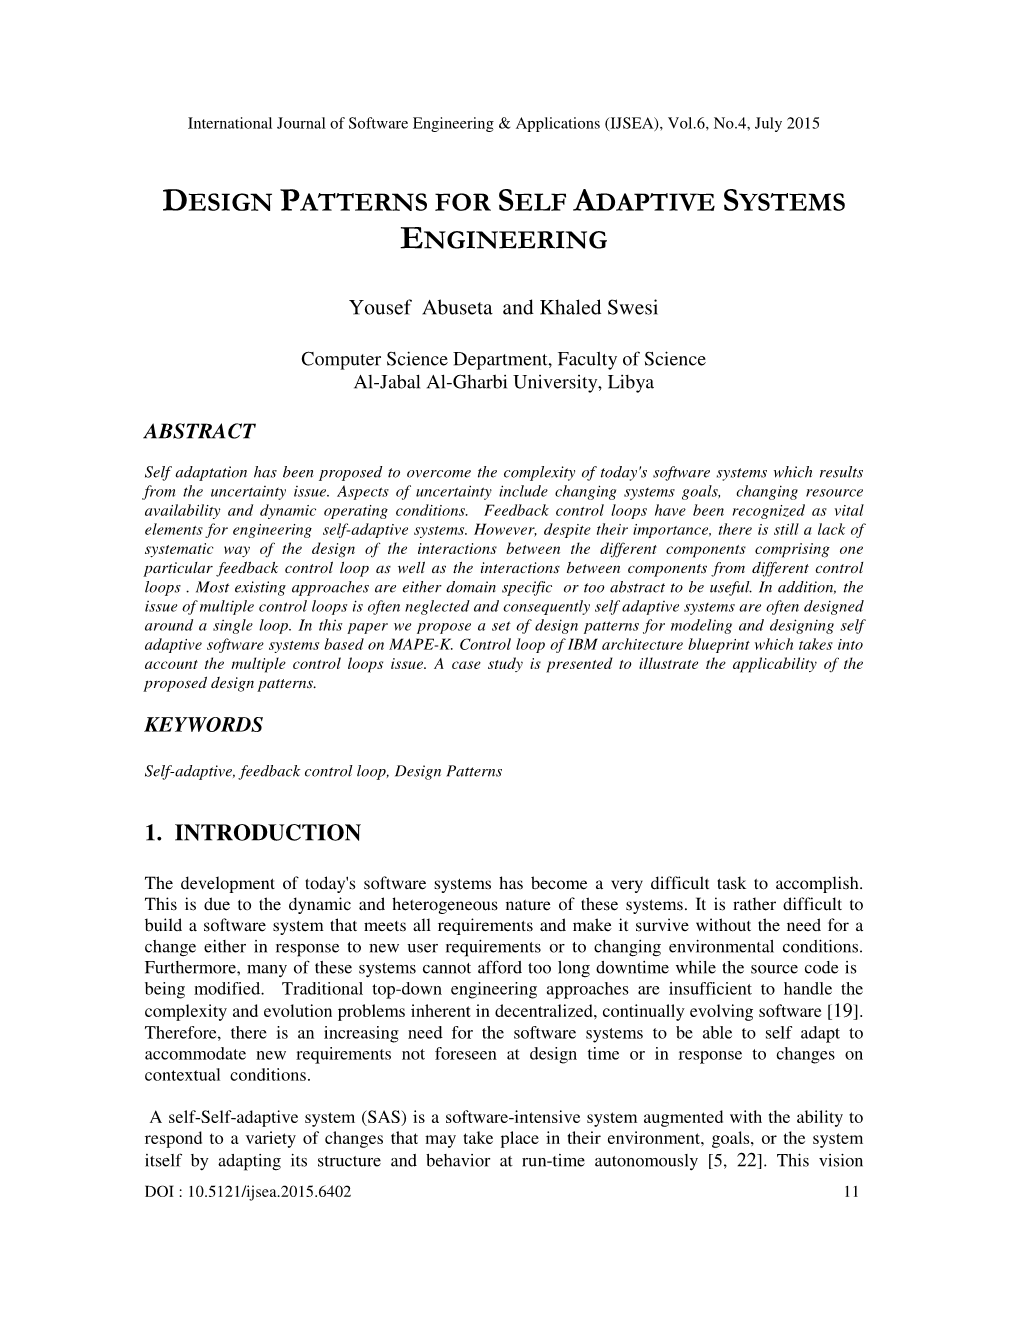 Design Patterns for Self Adaptive Systems Engineering